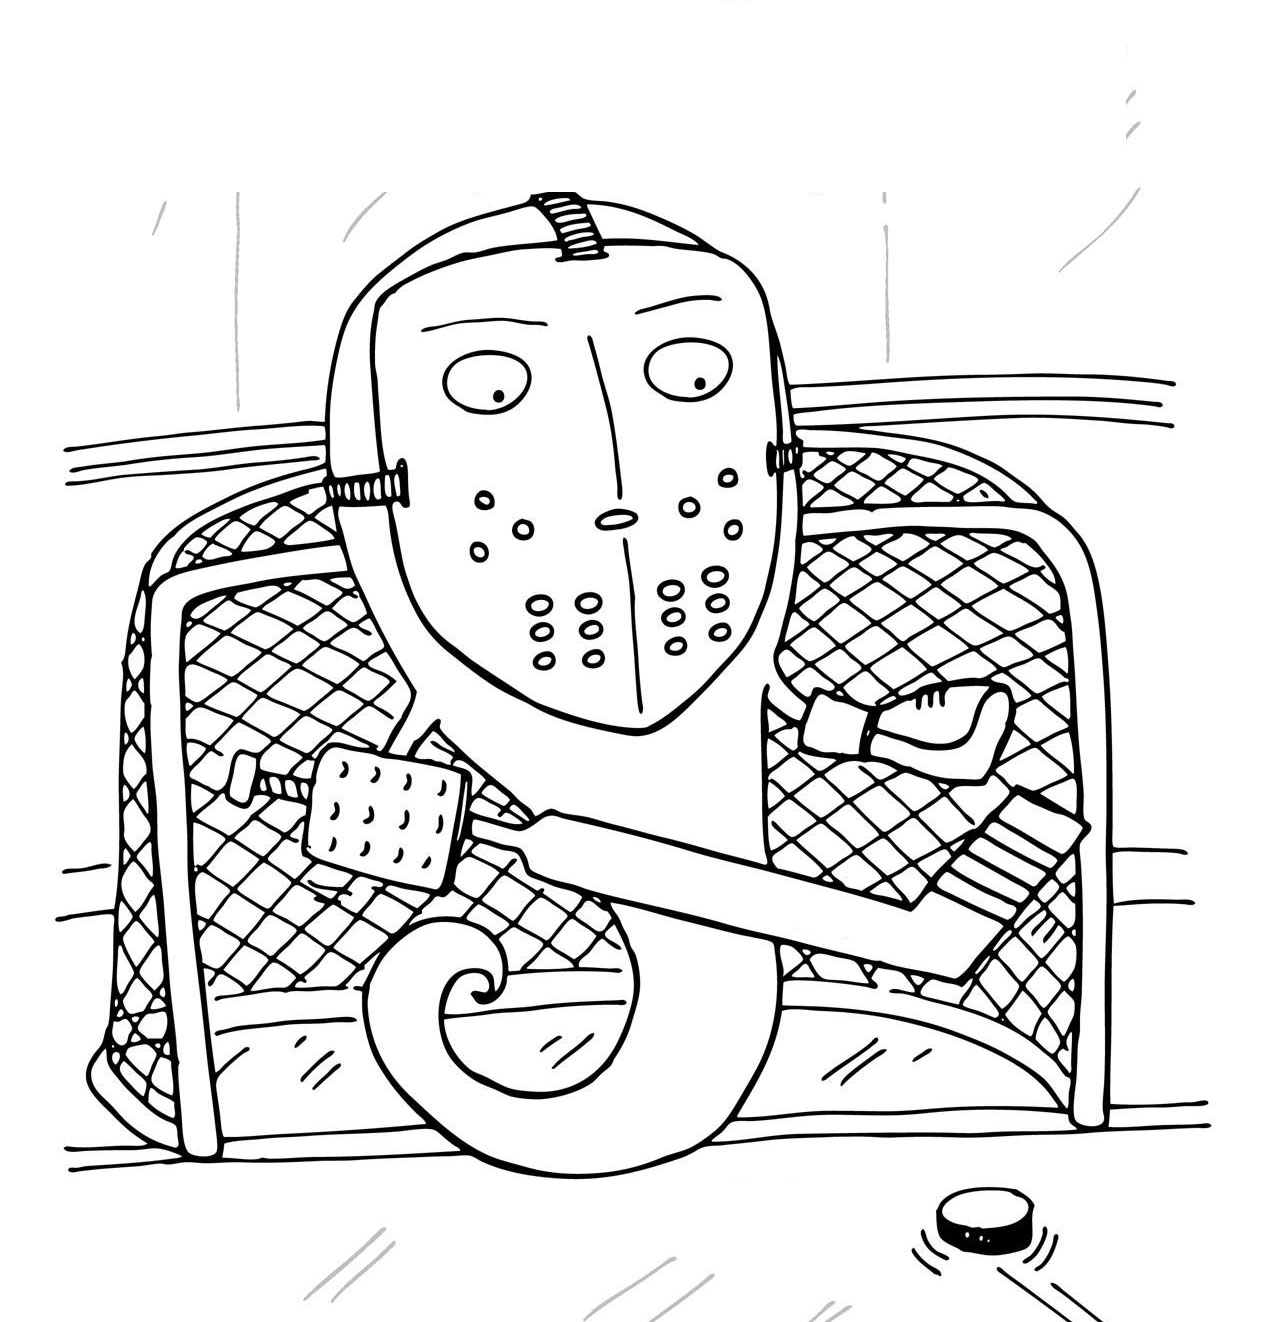 Hockey Halloween coloring page